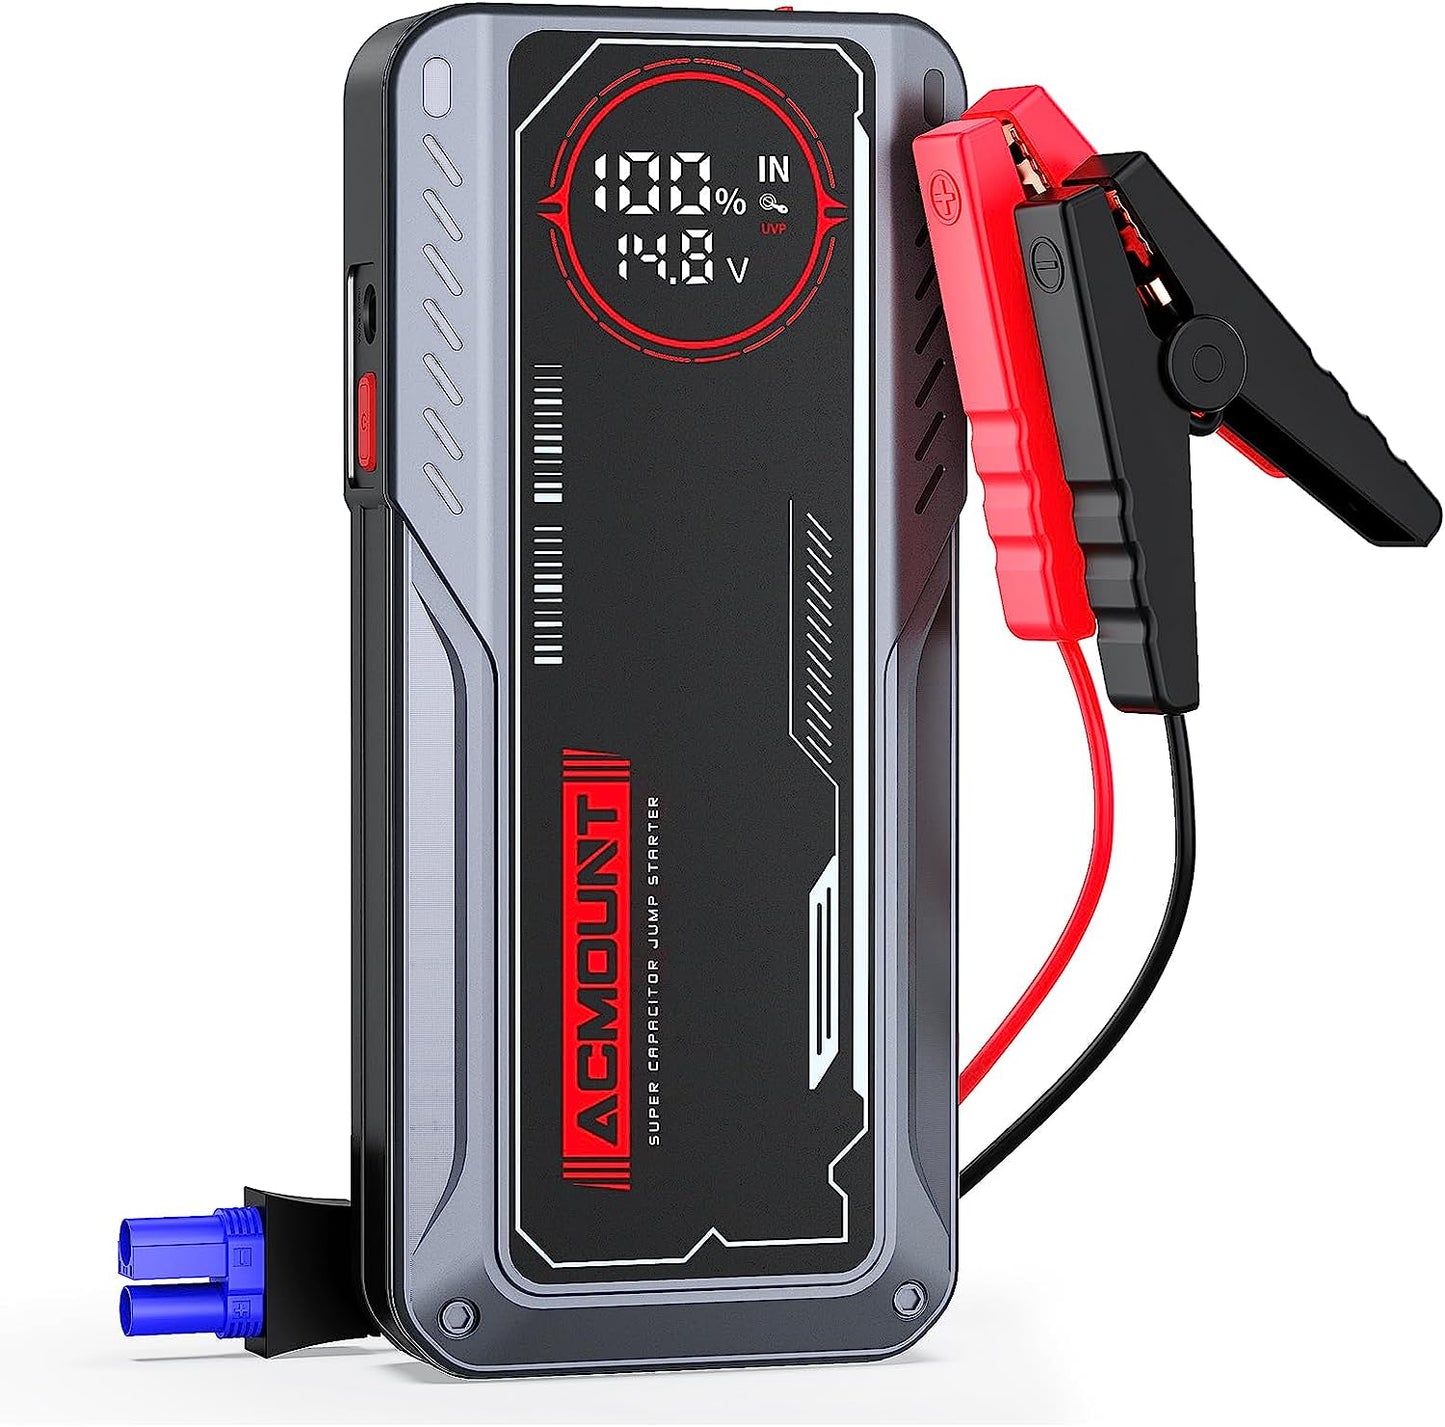 ACMOUNT 3000A Super Capacitor Jump Starter, 500F Battery-Free Car Jump Box(Up to 10.0L Gas, 8L Diesel), Built-in Supercapacitor with Large LCD Display, No Pre-Charging Starter